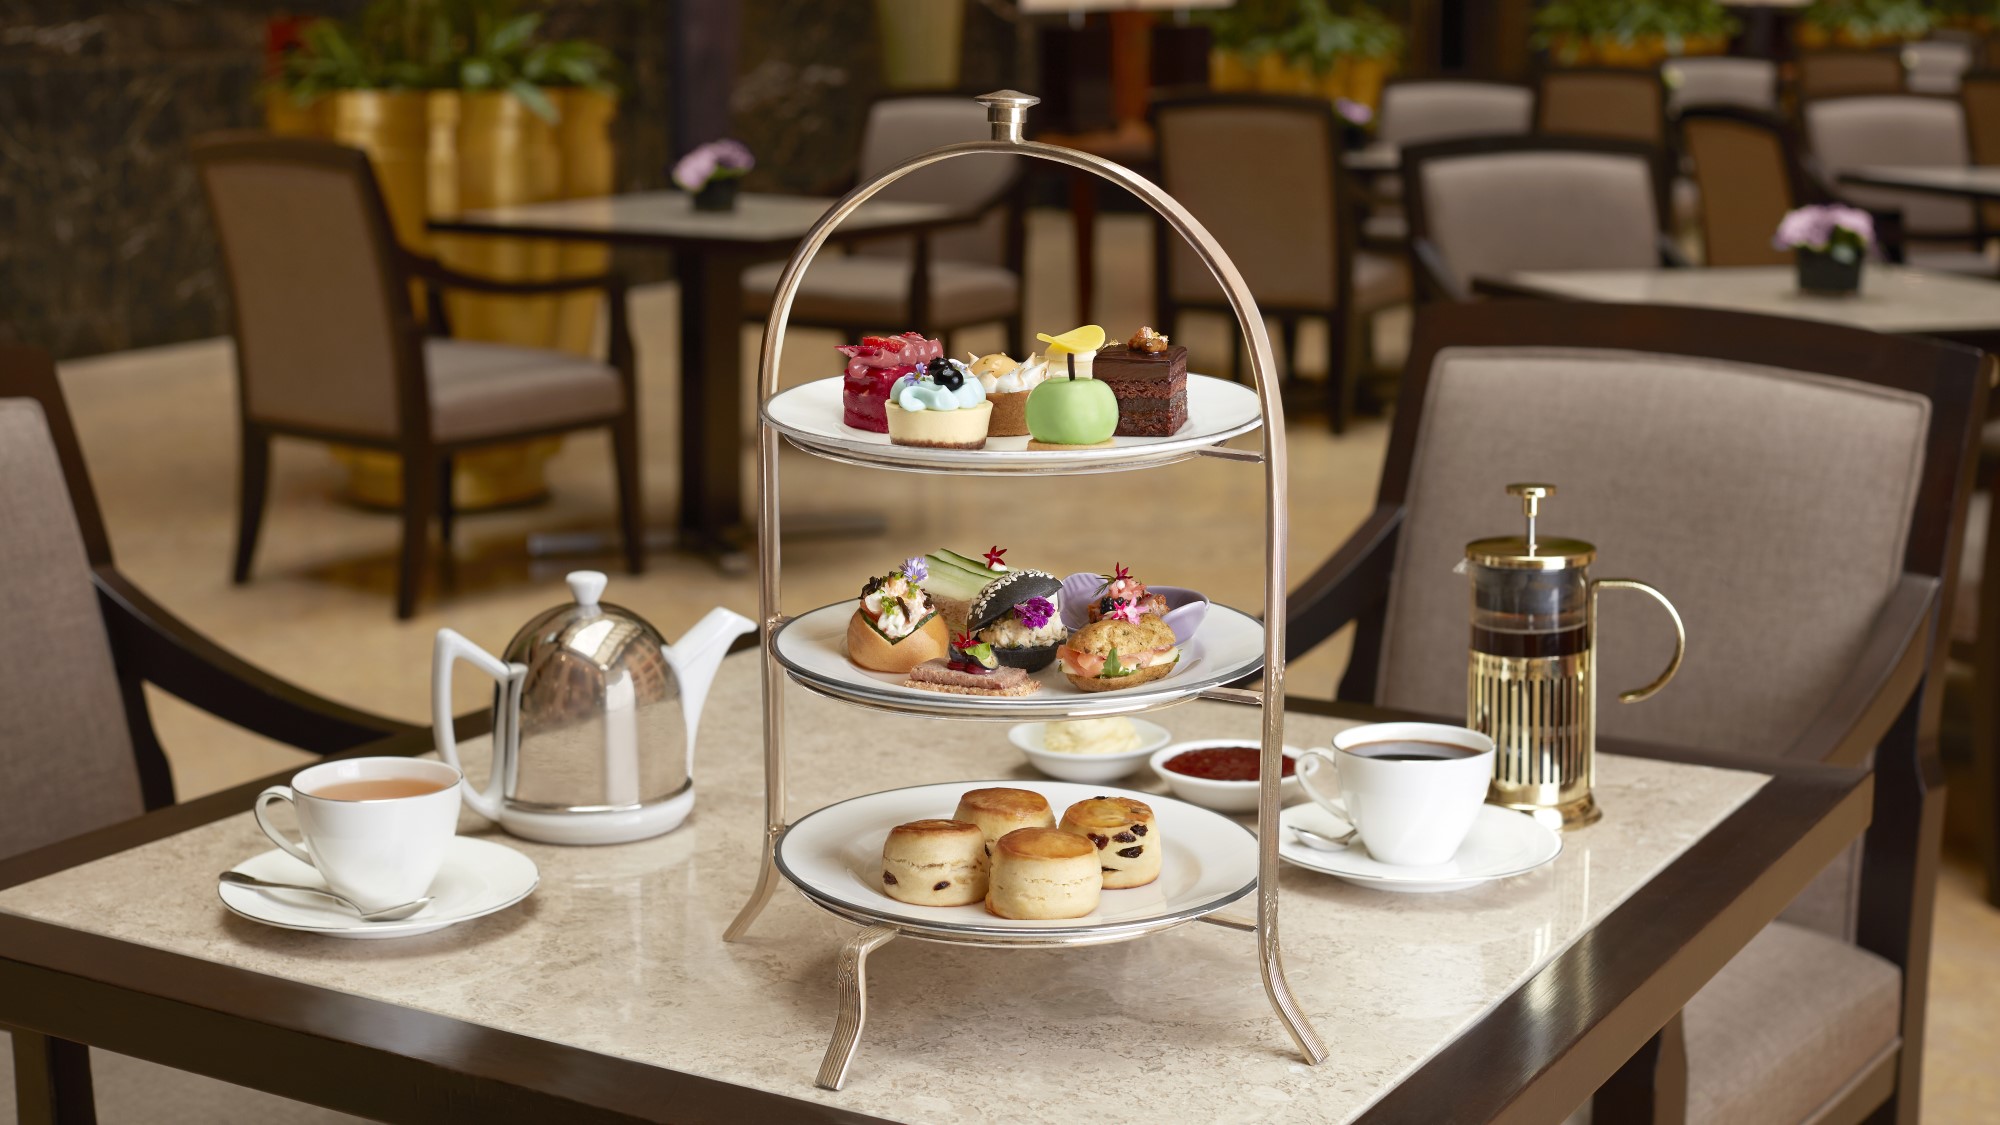 Traditional Afternoon Tea (Monday to Thursday) for One Adult at The Courtyard